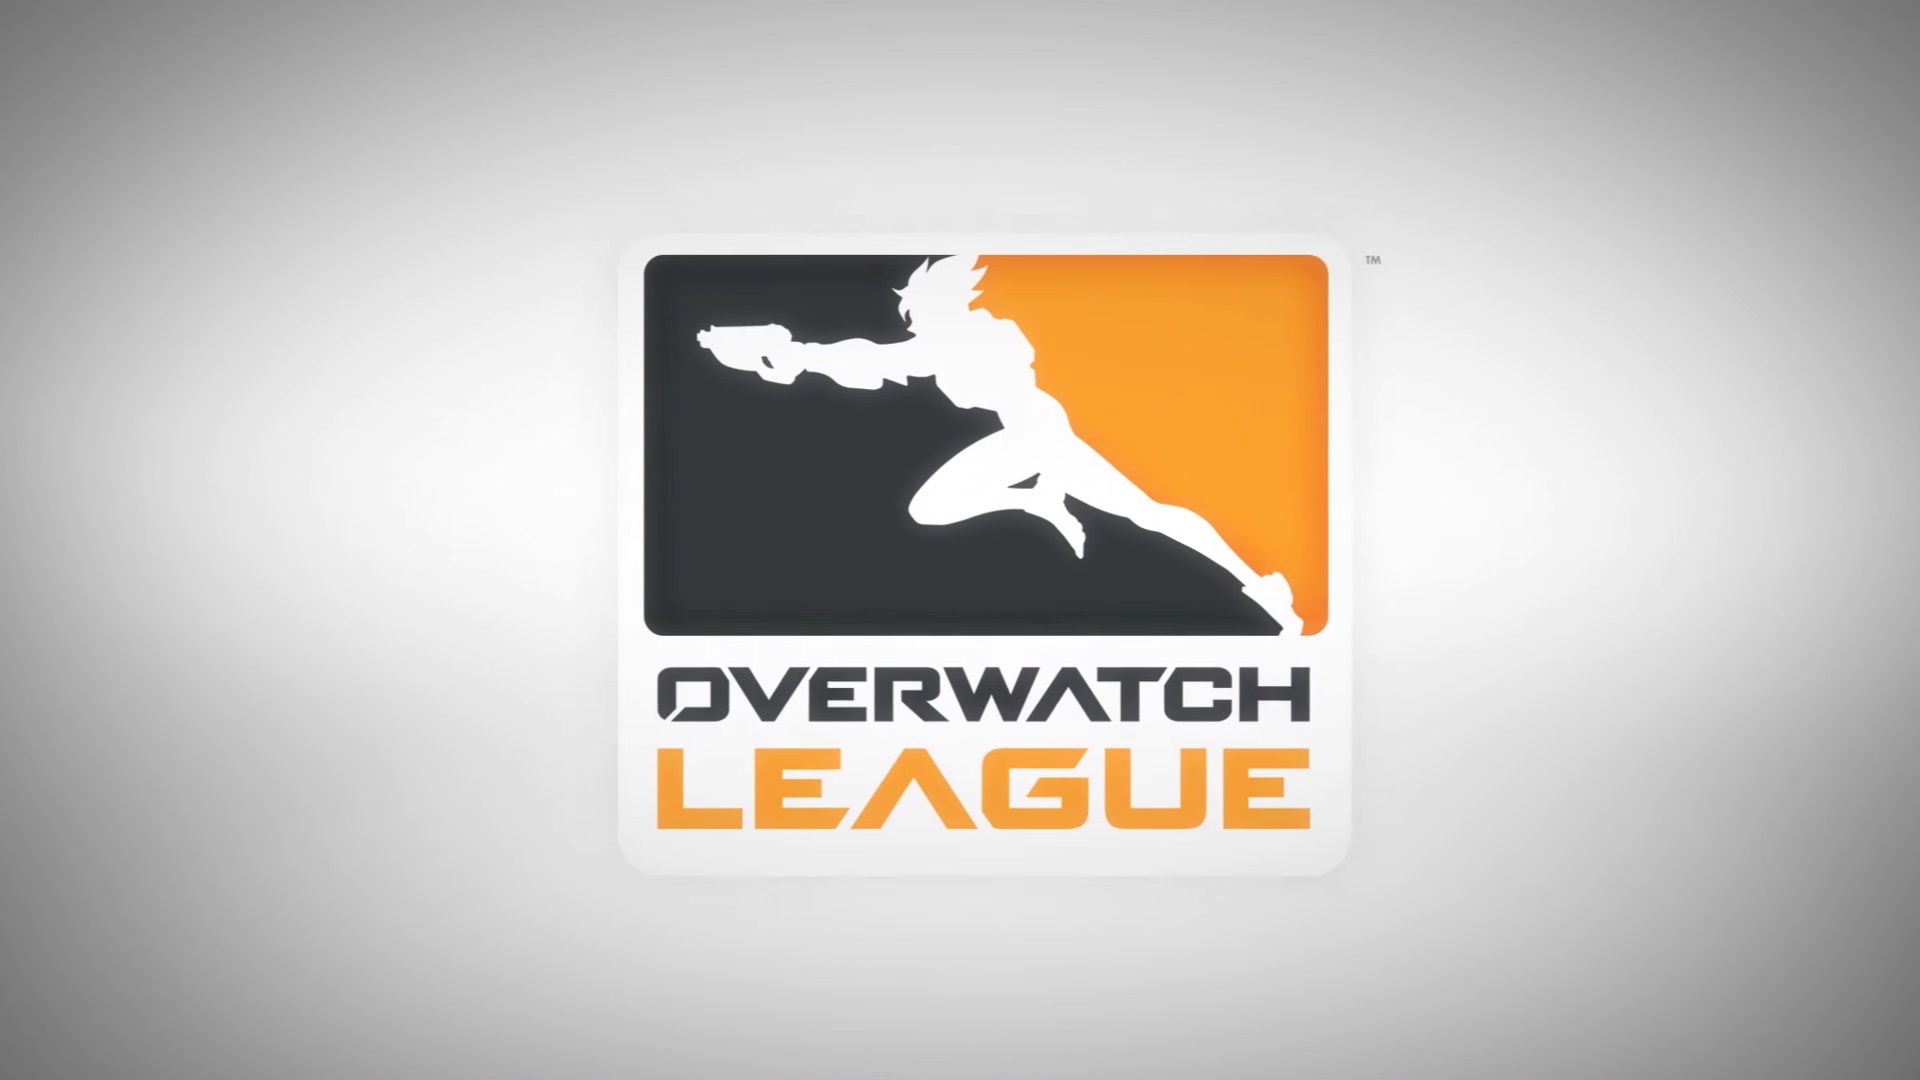 Overwatch League Midseason Madness event will be held in Seoul